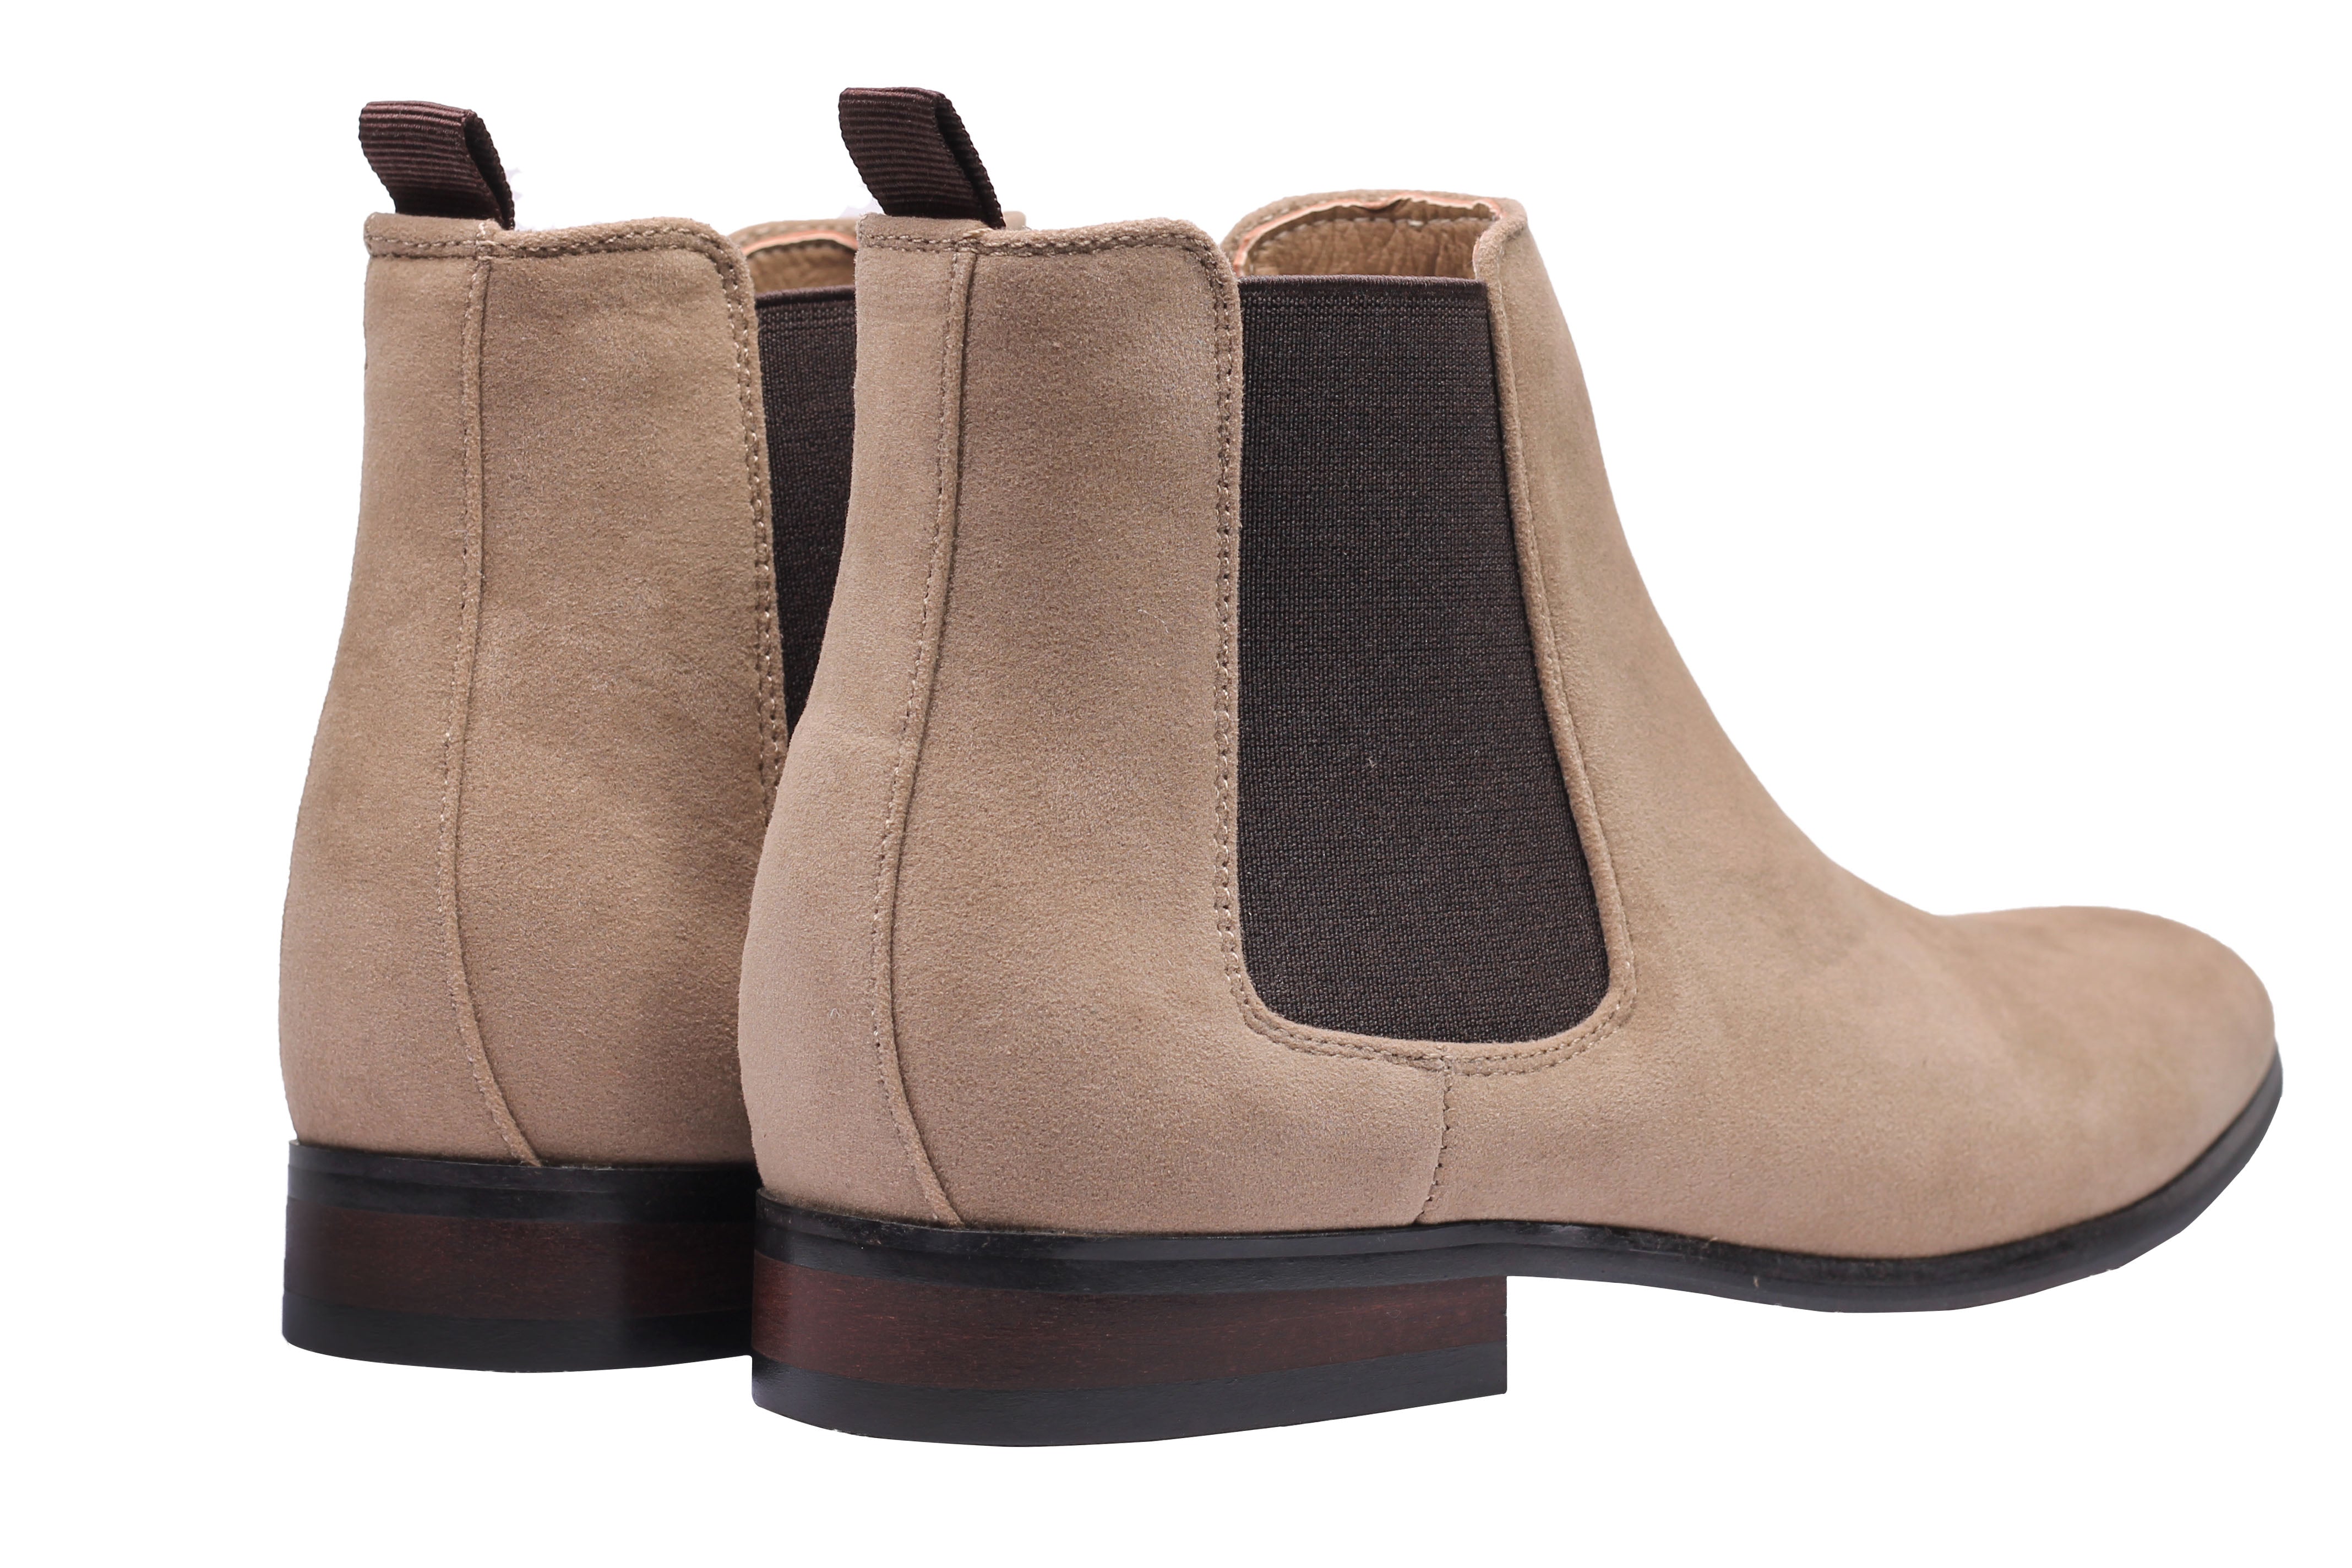 CHELSEA BOOTS IN SUEDE